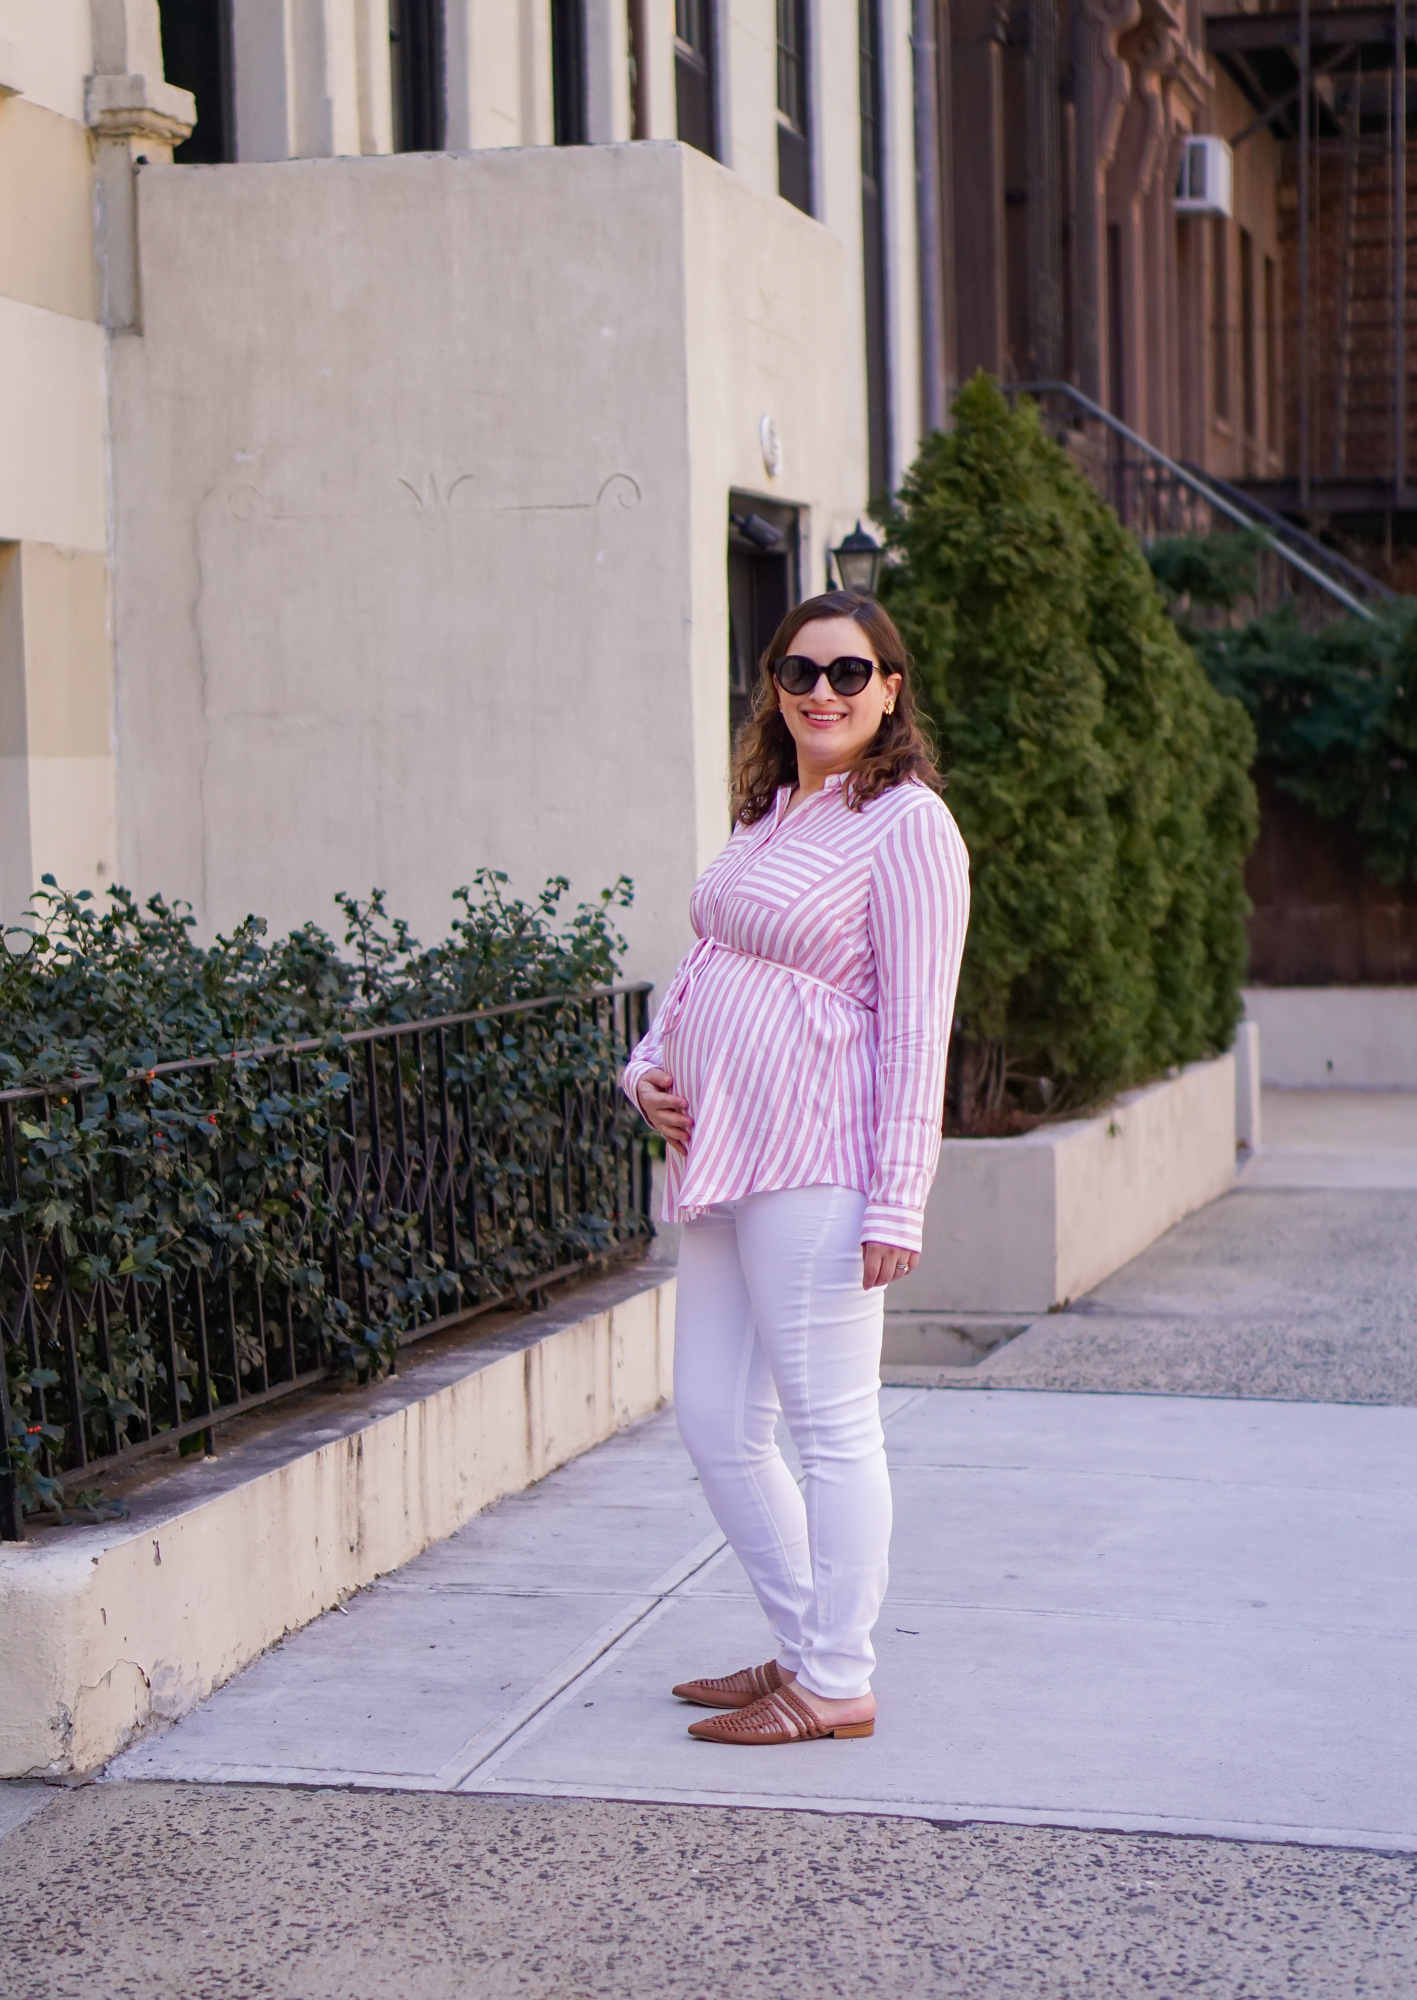 Springy striped shirt and white jeans